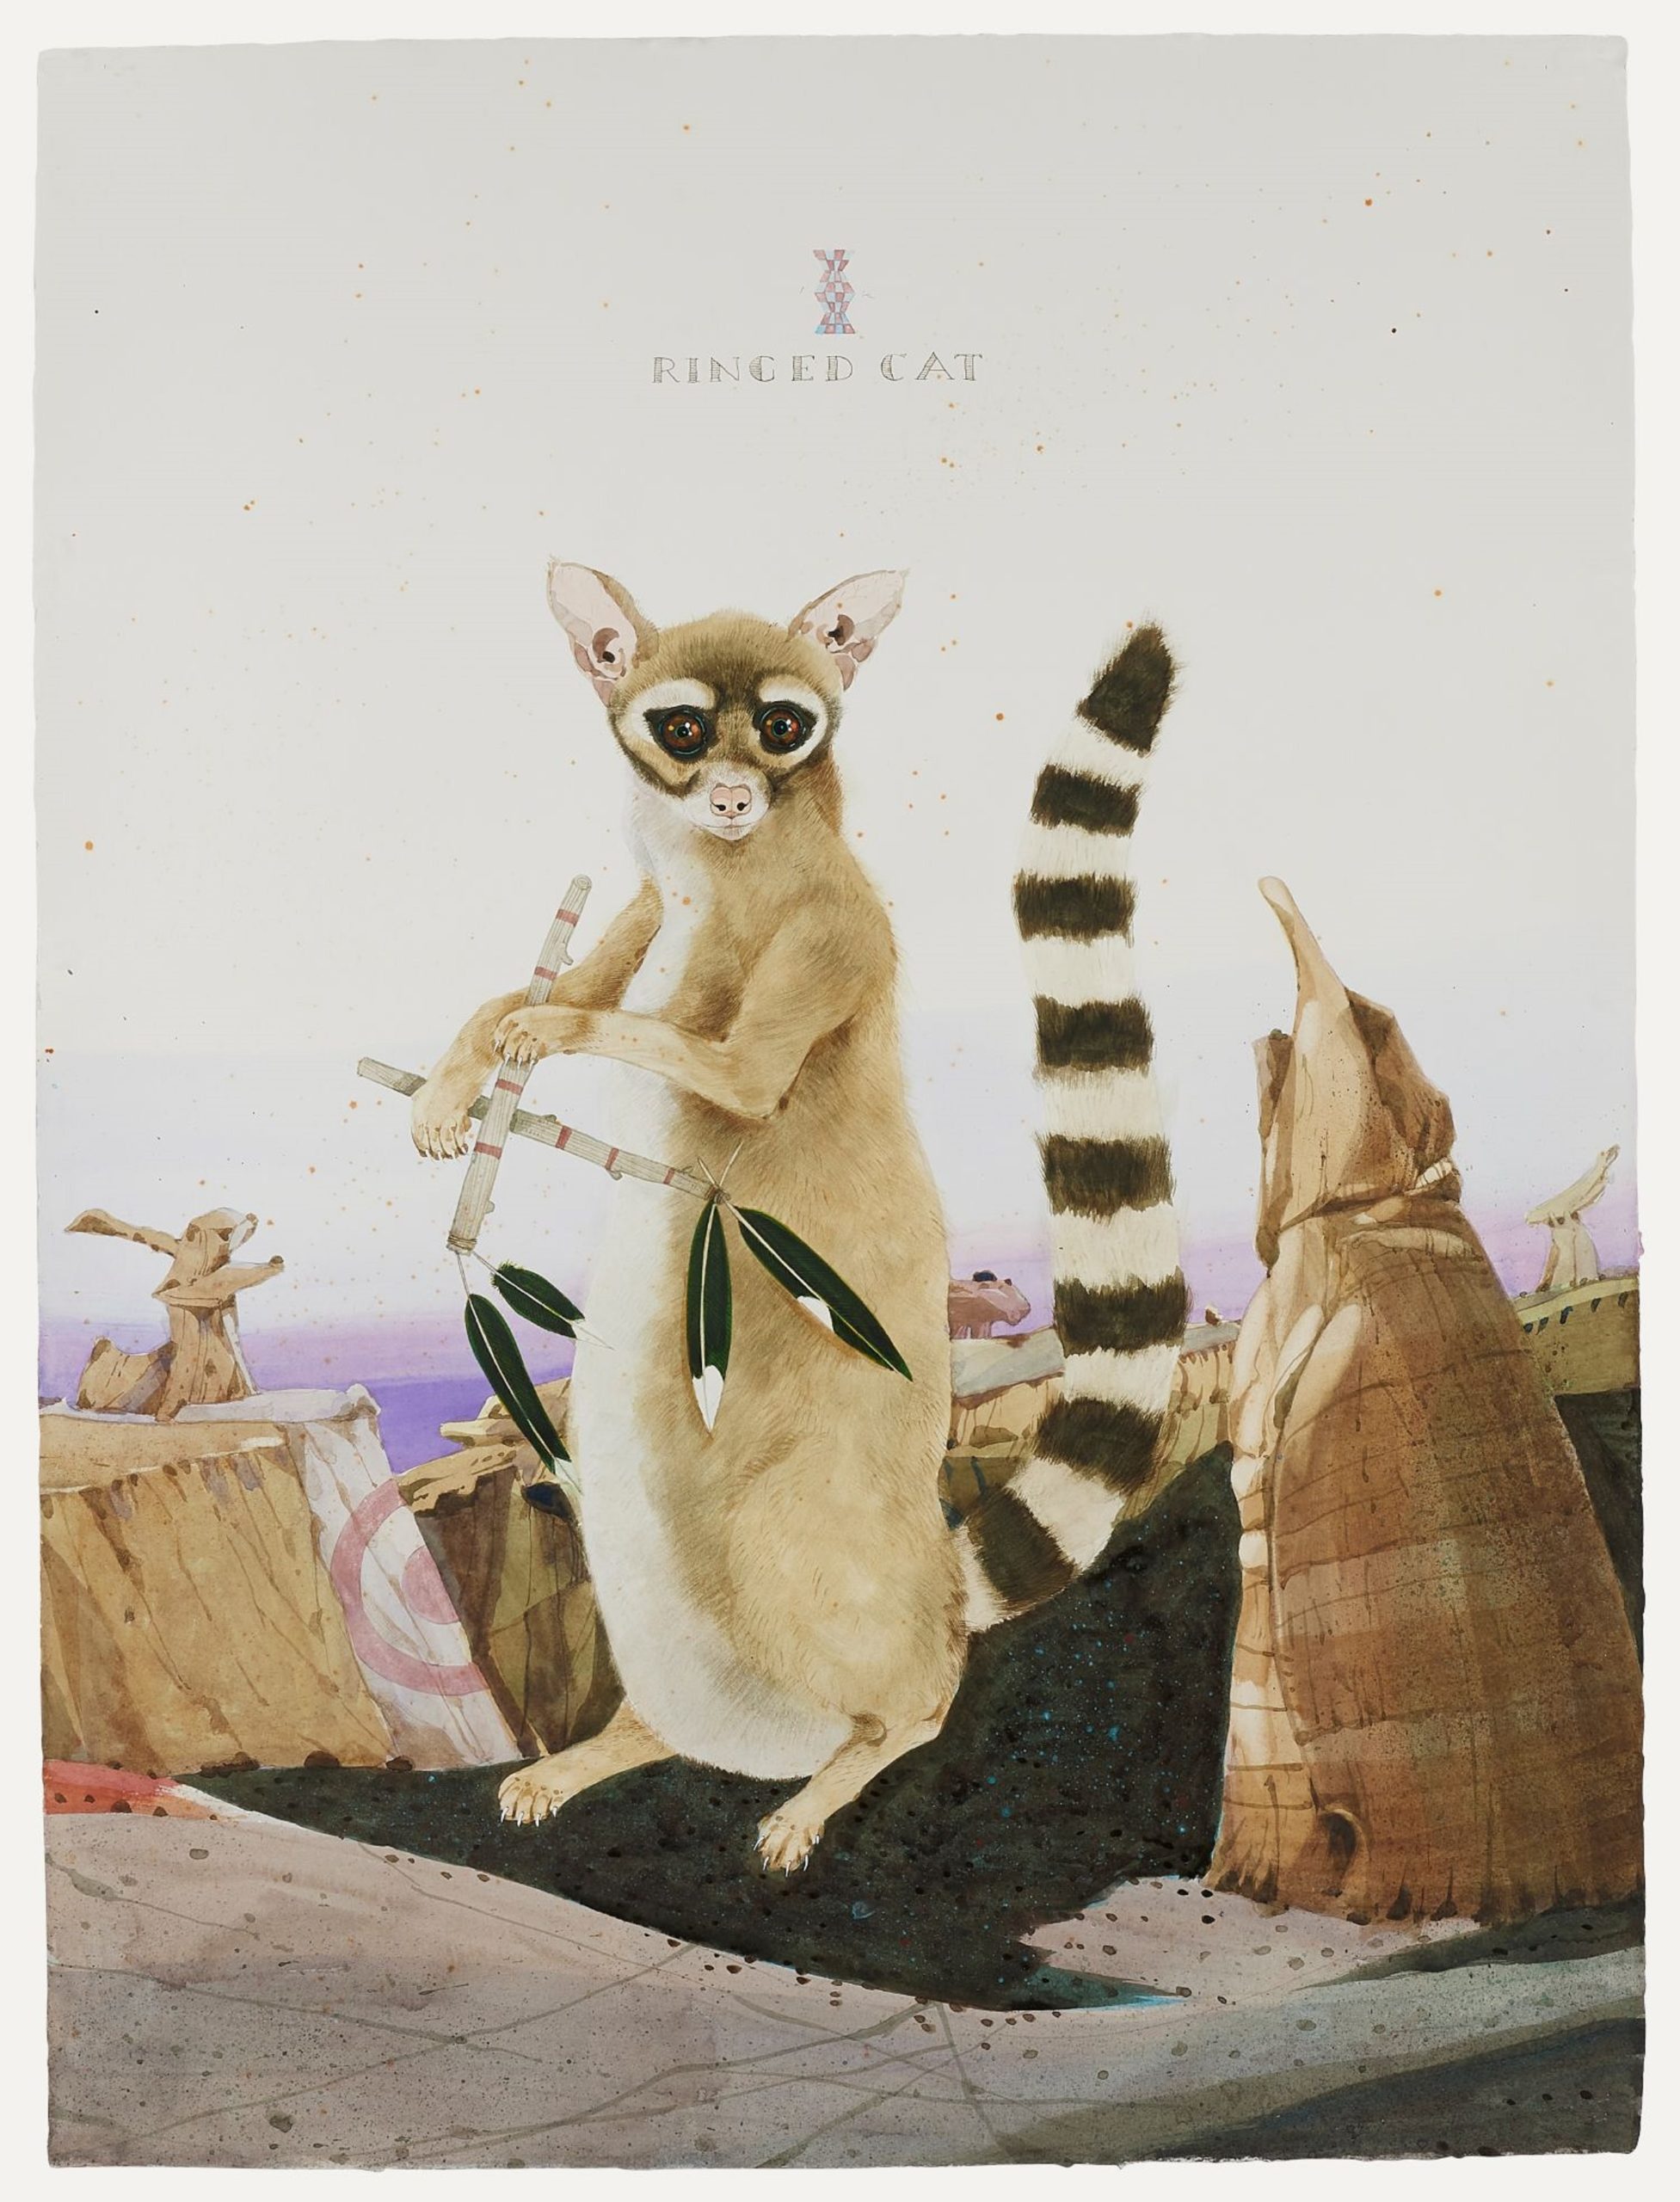 
		                					Scott Kelley		                																	
																											<i>Ringed Cat - The Ah-Shi-Sle-Pah Orchestra,</i>  
																																								2019 – 20, 
																																								watercolor, ink, gouache and graphite on paper, 
																																								40 x 30 inches 
																								
		                				